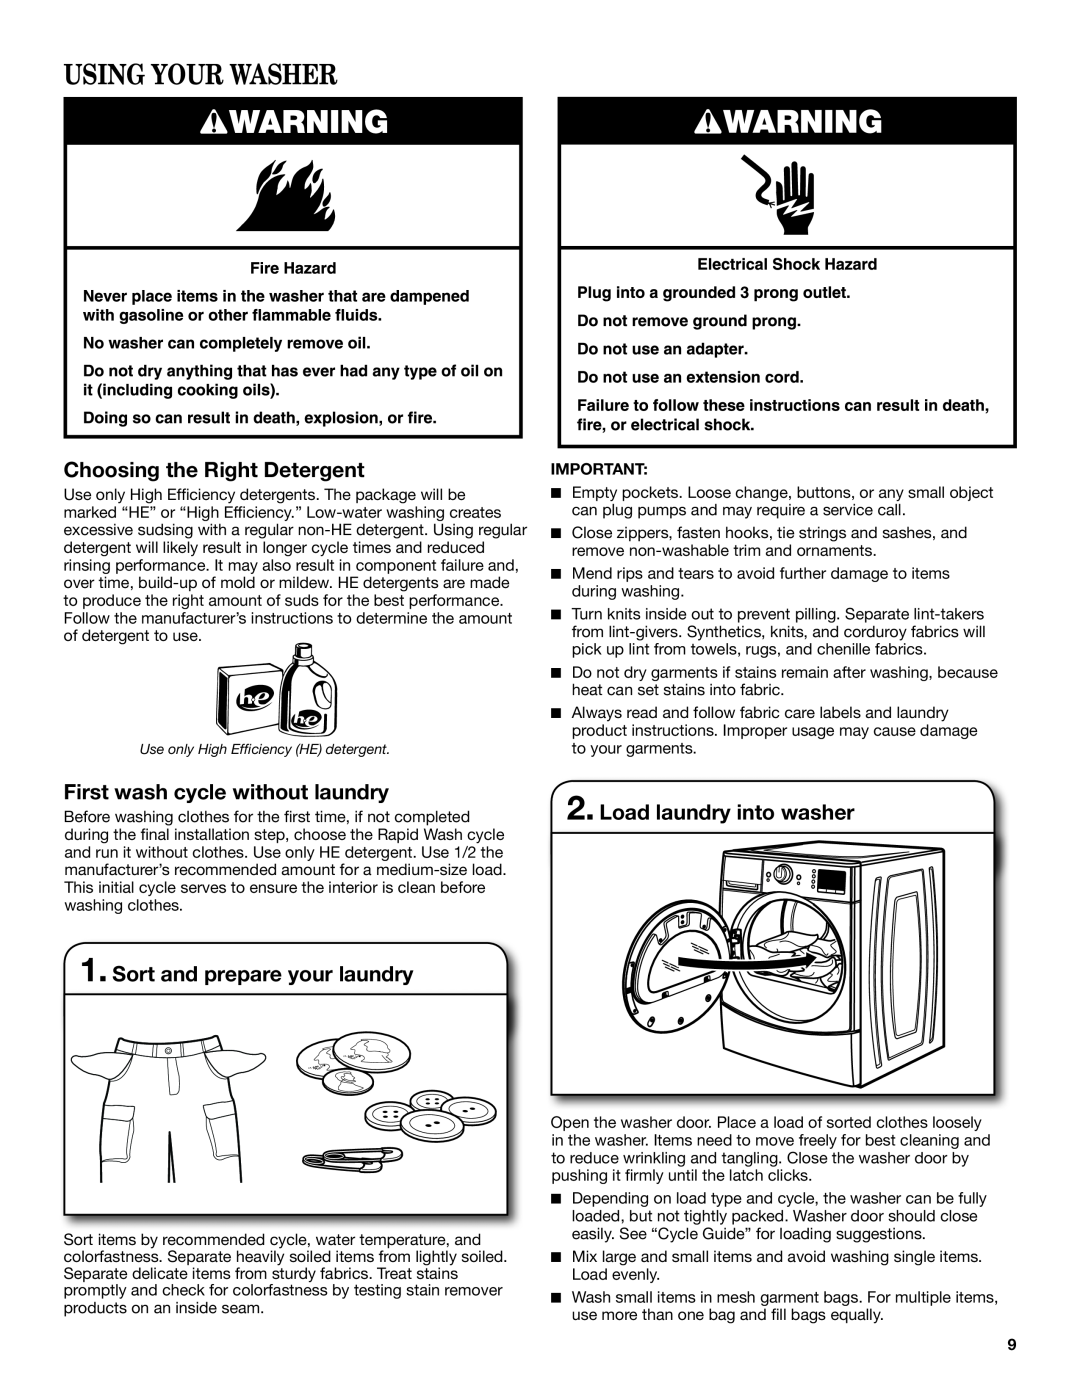 Maytag YMHWE251, YMHWE301, YMHWE201 manual Using Your Washer, Choosing the Right Detergent, First wash cycle without laundry 